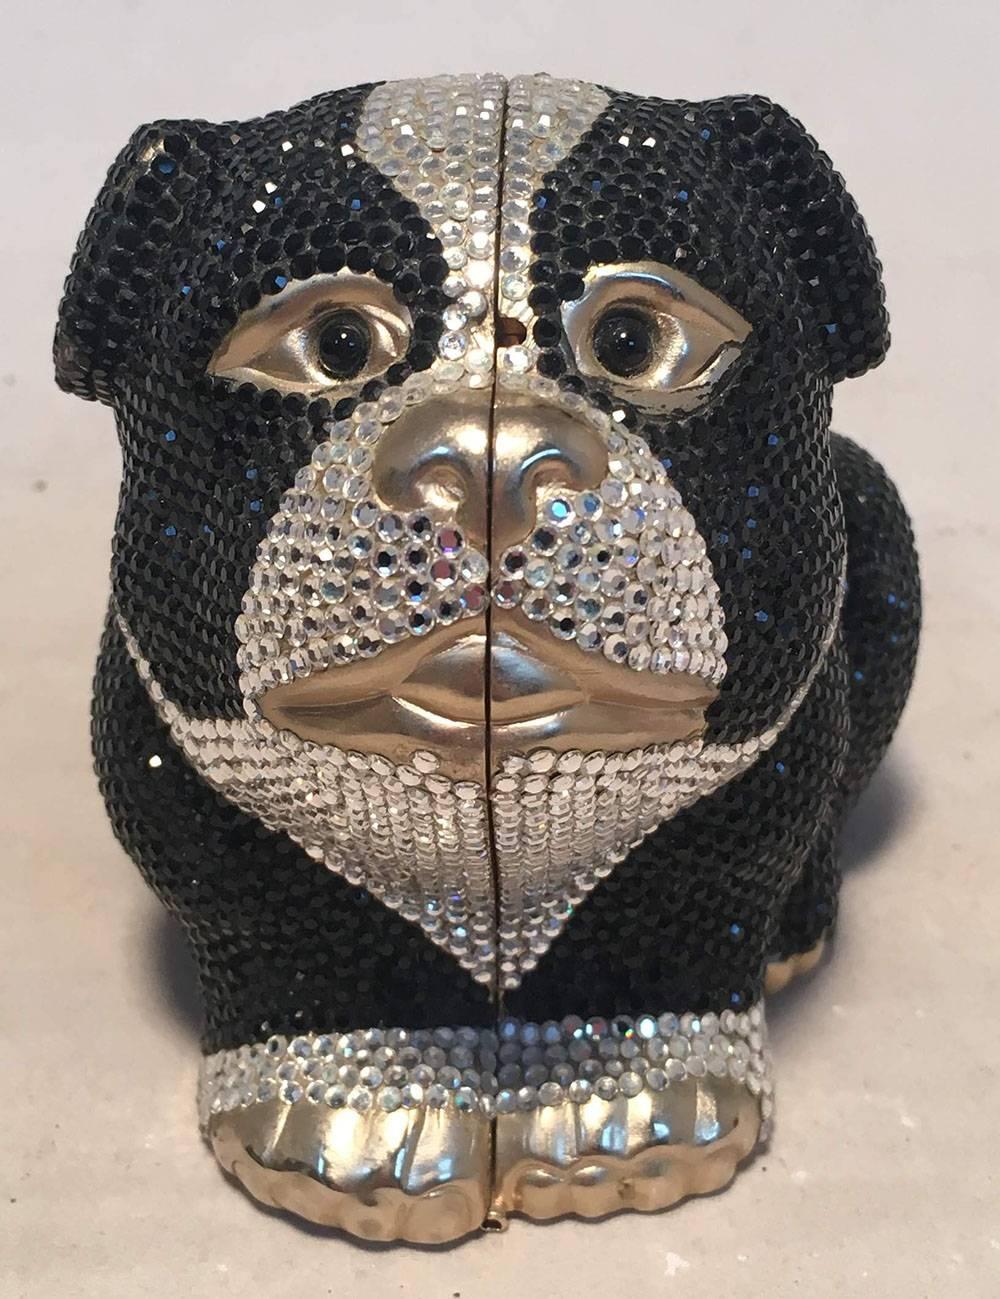 BEAUTIFUL Judith Leiber Swarovski Crystal bulldog minaudiere evening bag in excellent condition.  Black and silver Swarovski crystal exterior with gold bulldog shaped body. Top button closure opens to a gold leather lined interior with 2 separate